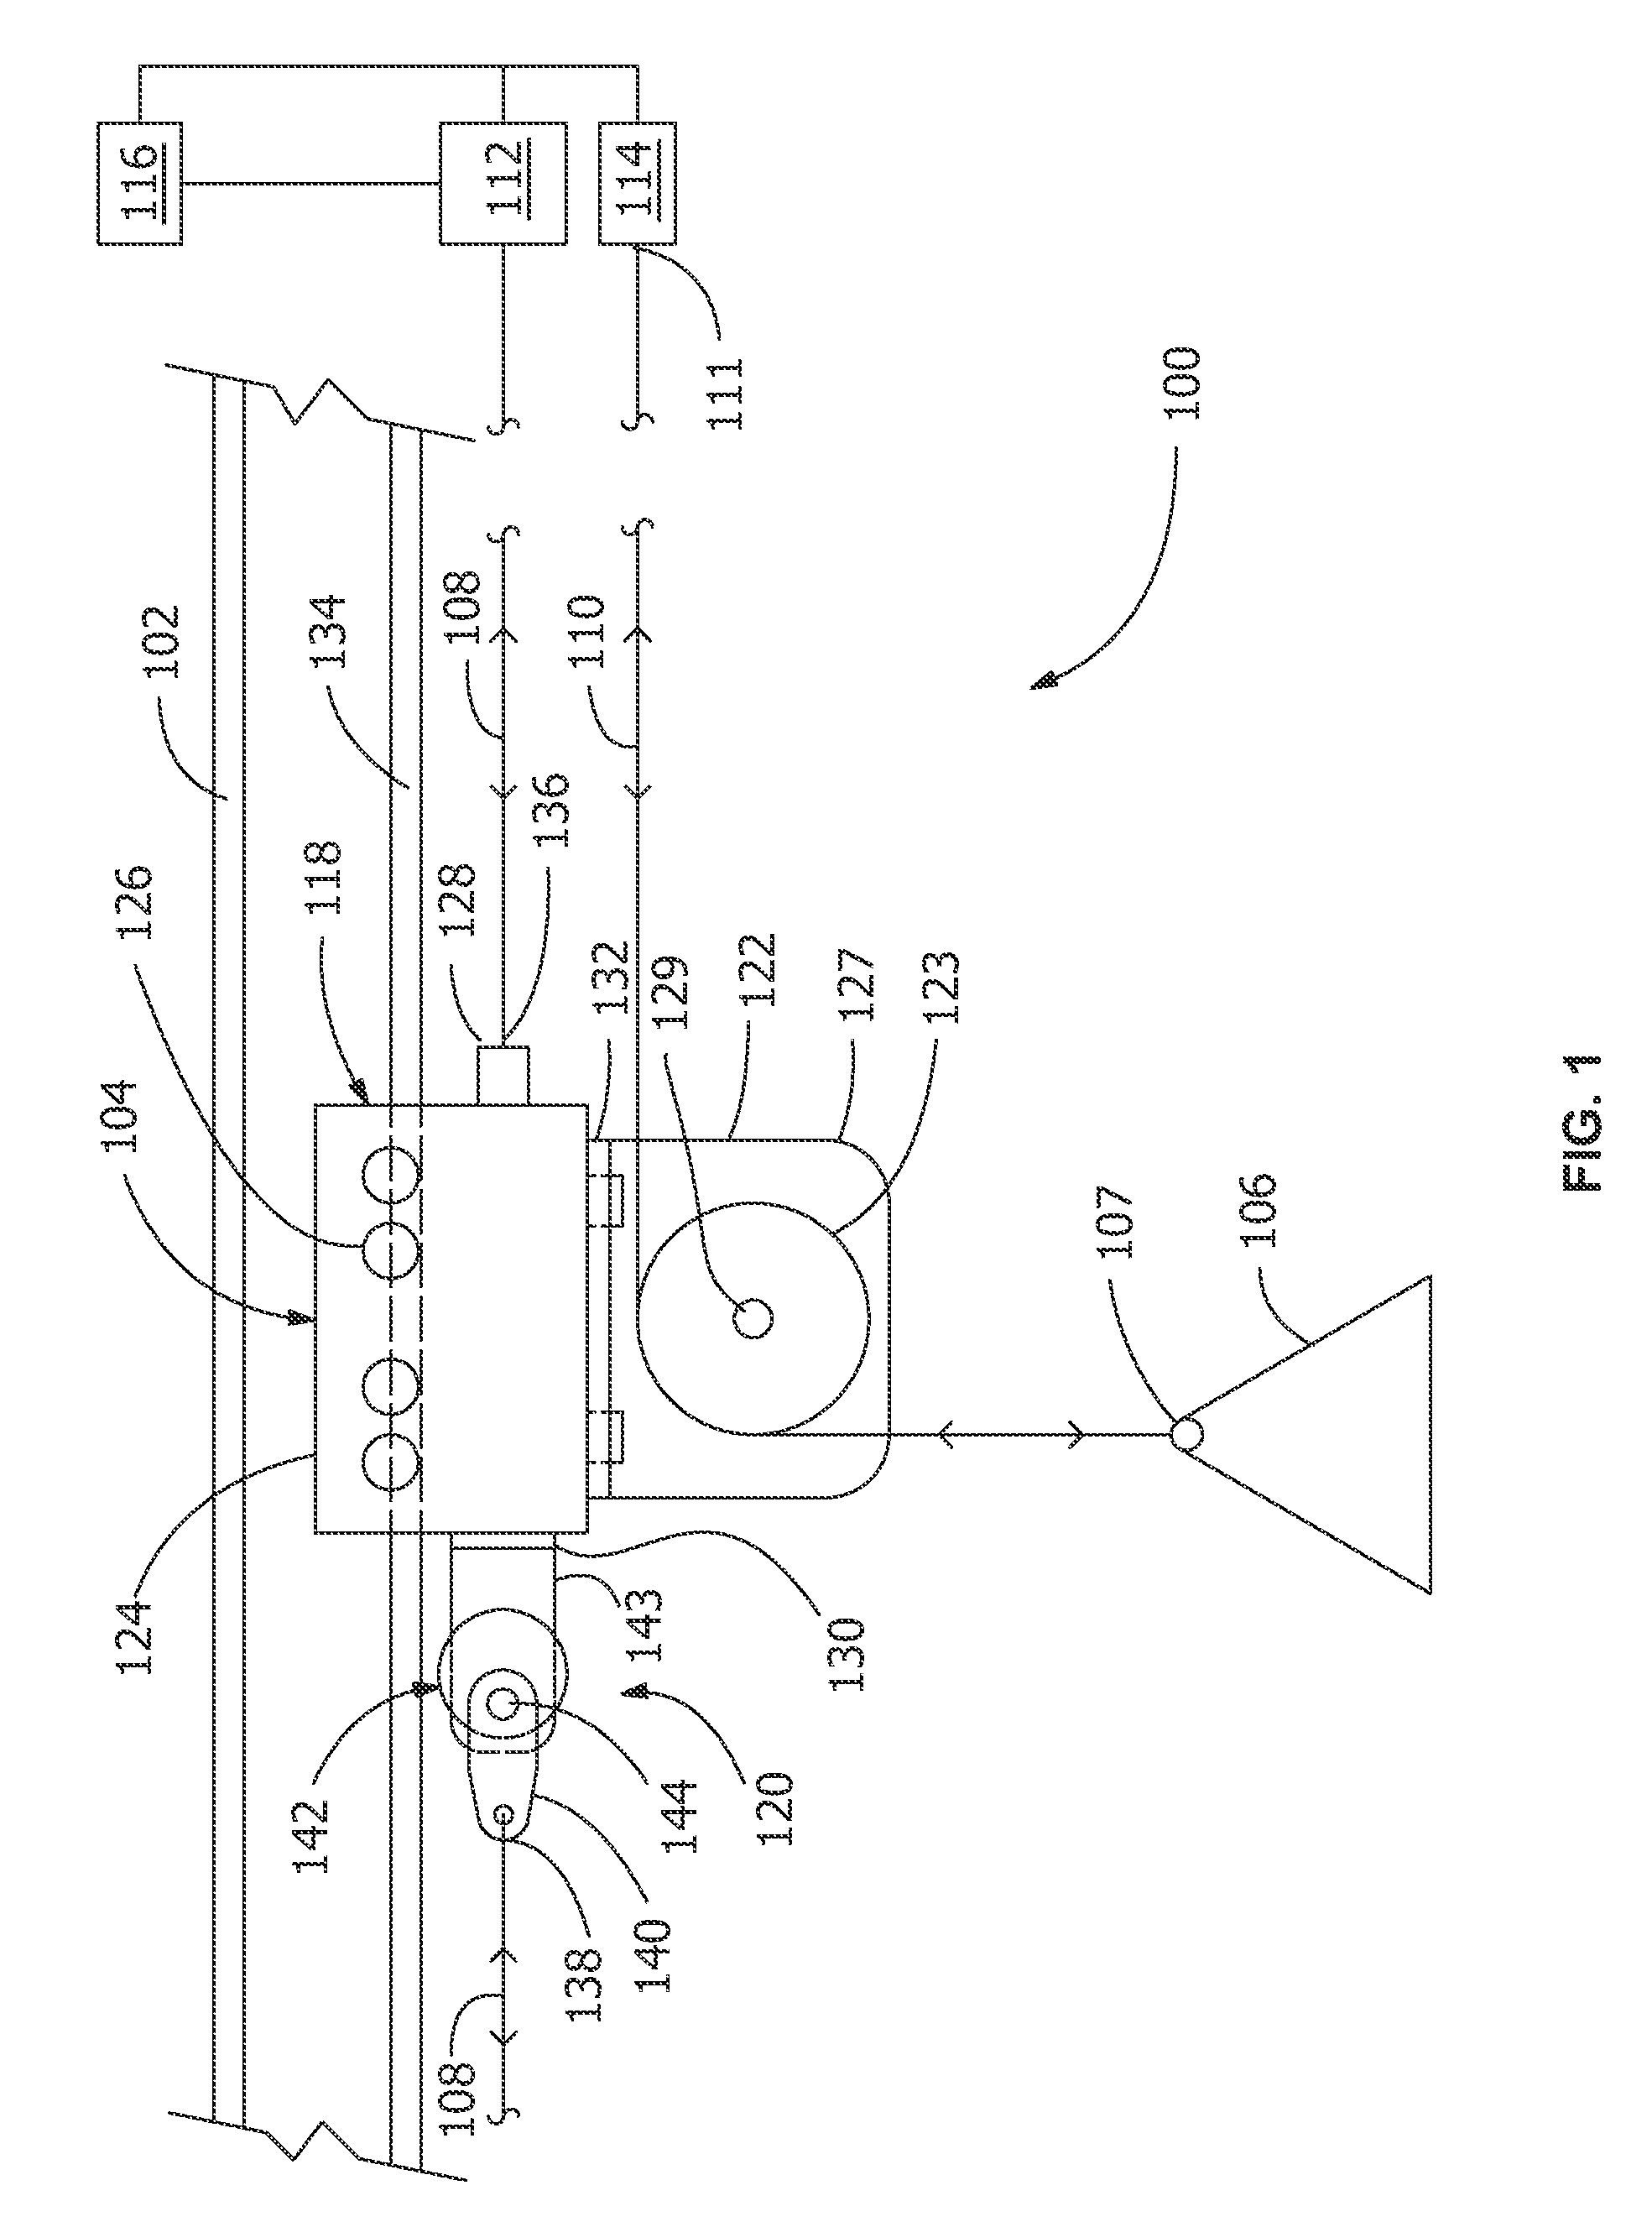 Engagement article, load positioning system, and process for positioning loads